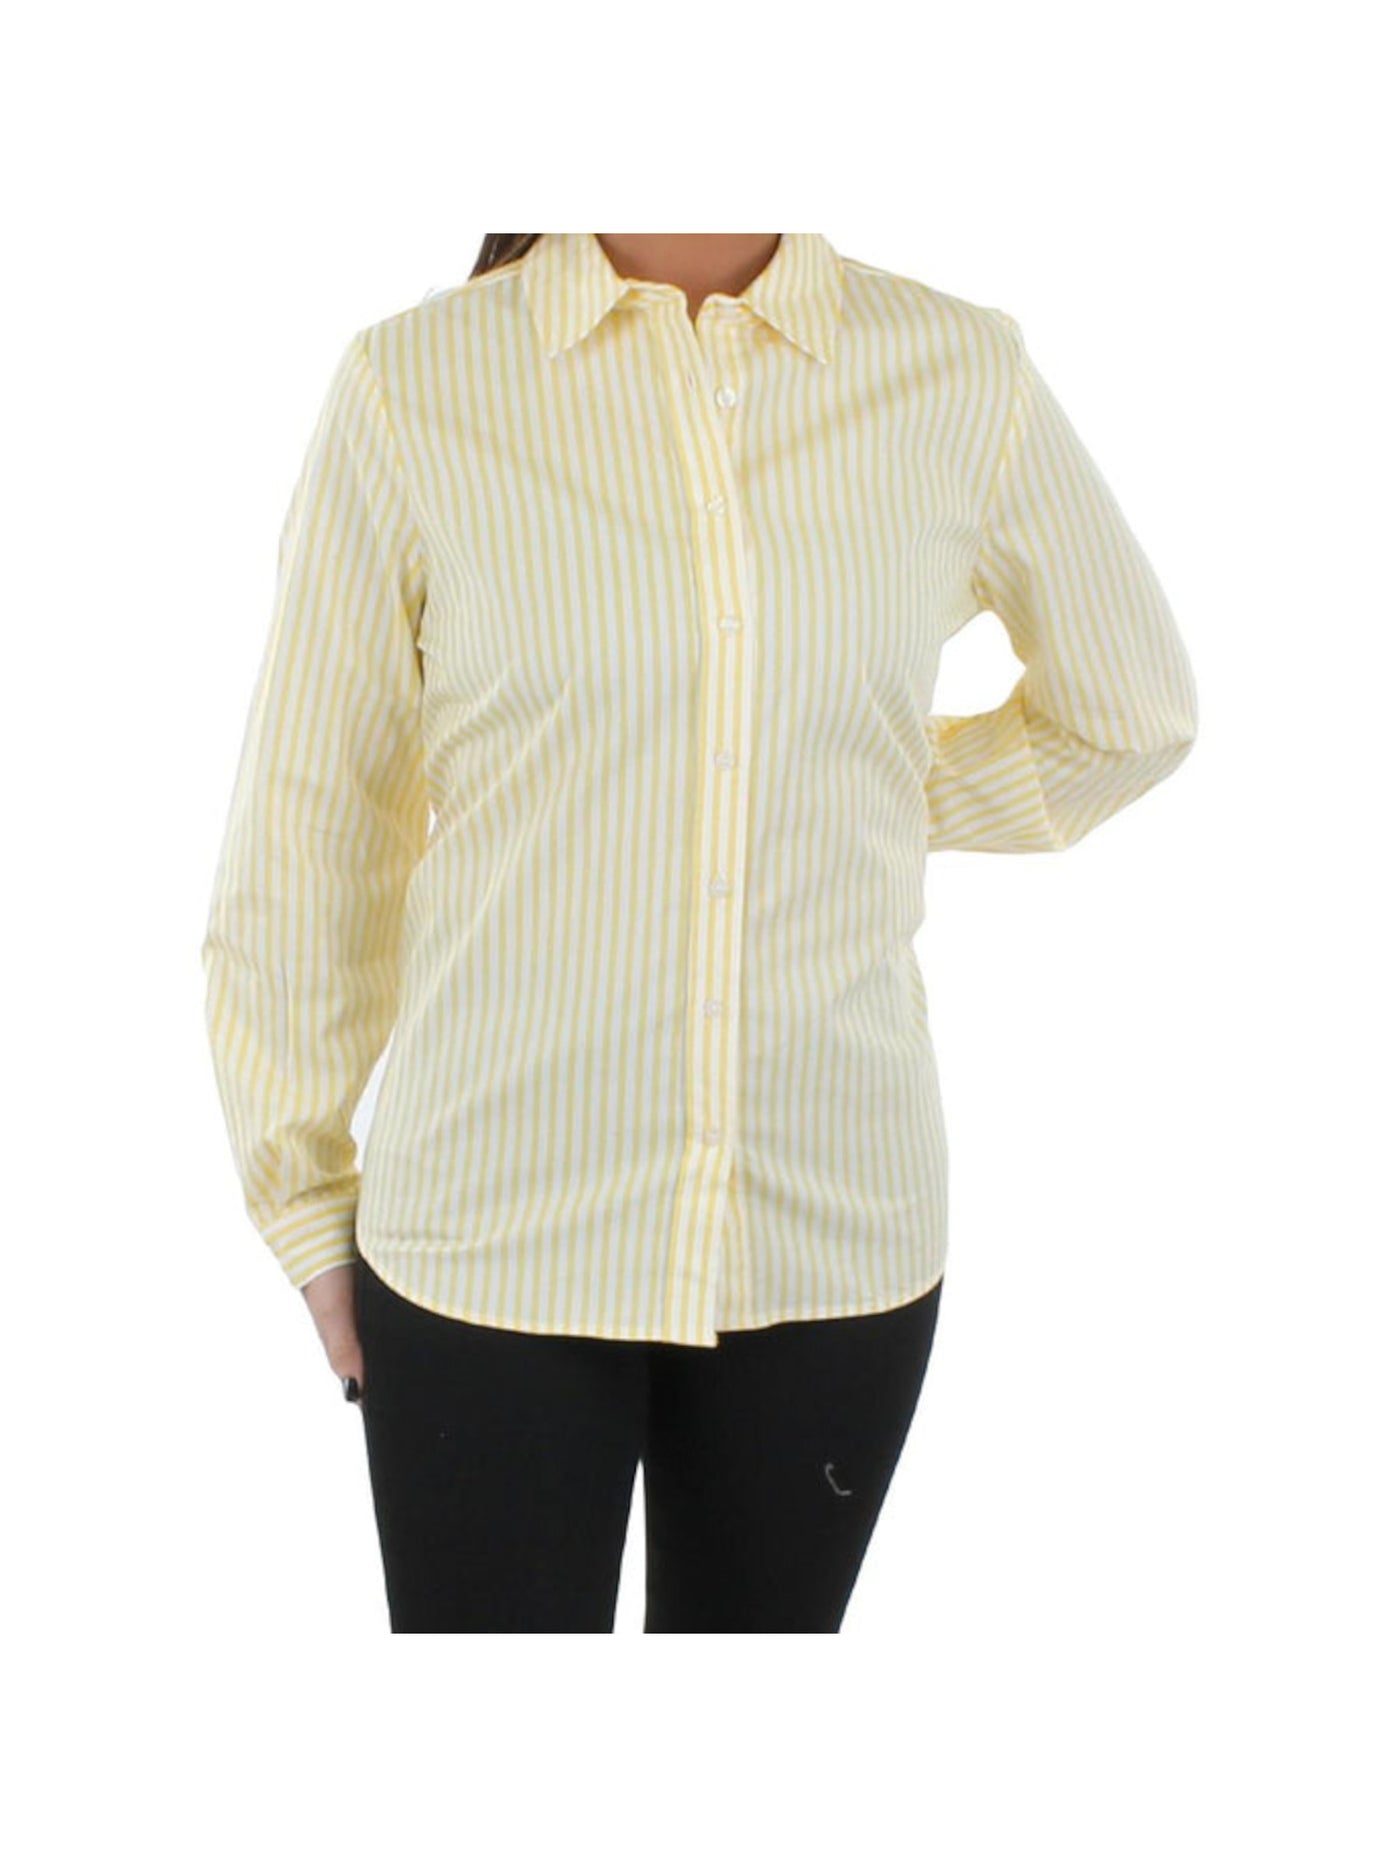 JONES NEW YORK Womens Yellow Pleated Shirttail Hem Striped Cuffed Sleeve Collared Button Up Top L